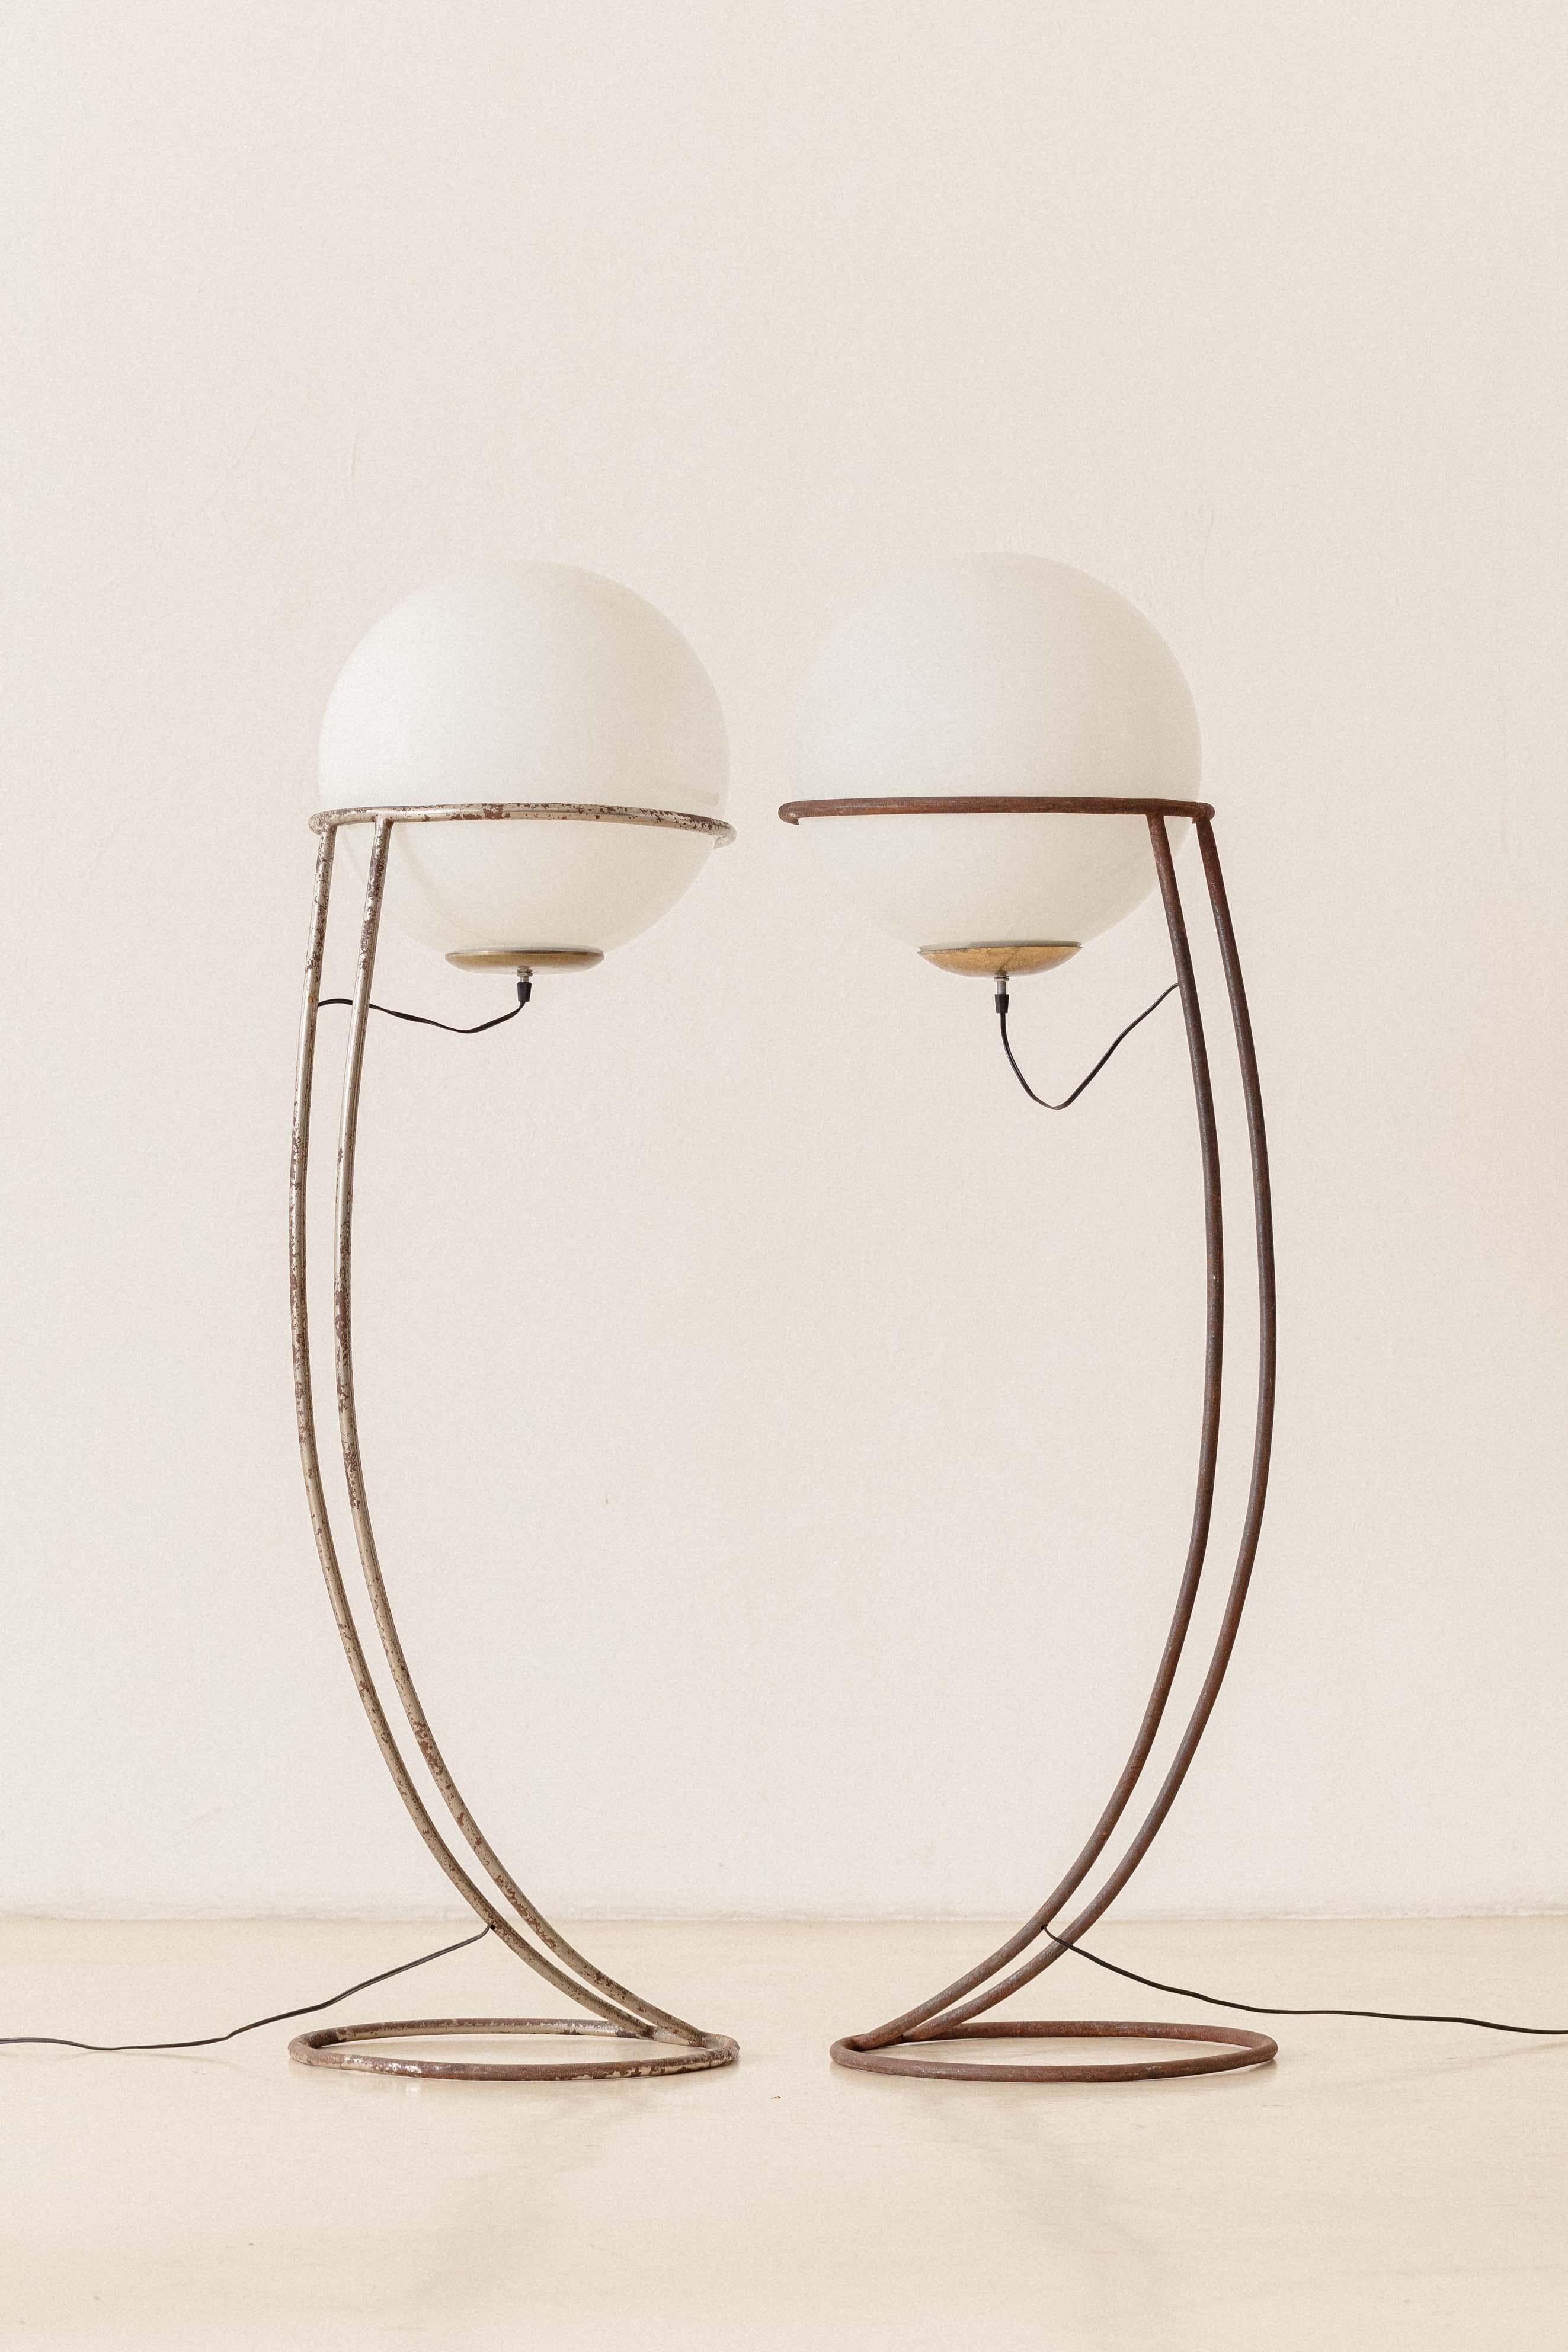 Pair of Italian Floor Lamps by Unknown Designer, 1950s, Gino Sarfatti Style For Sale 7